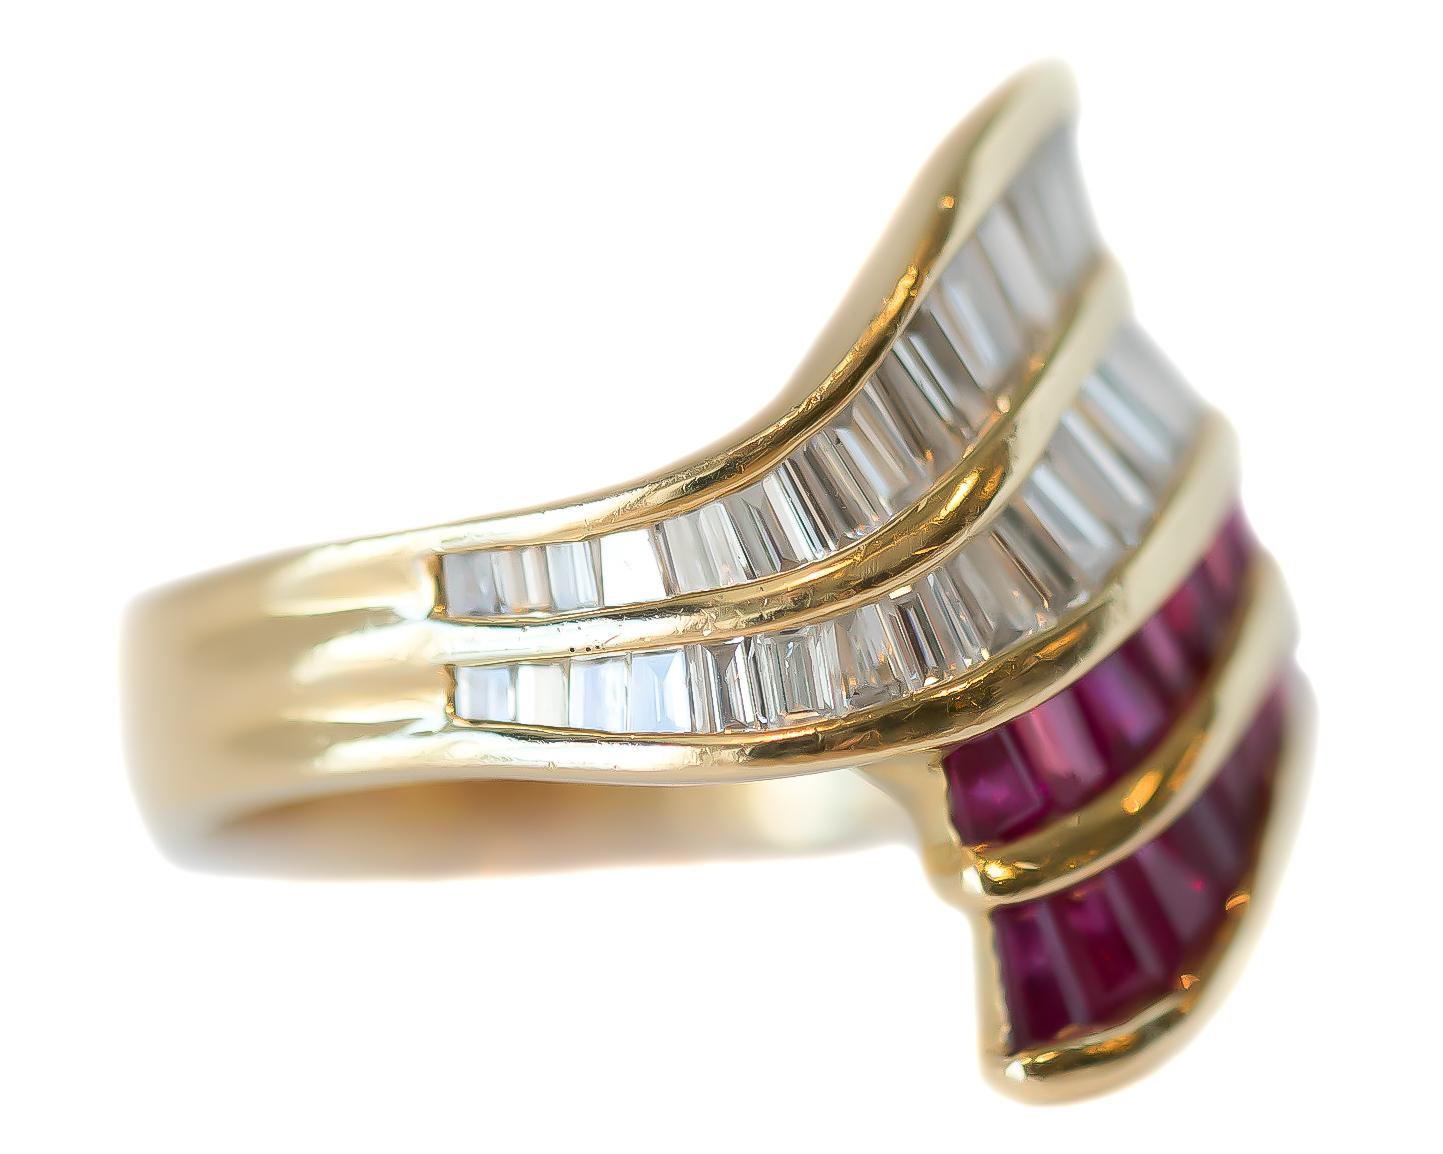 1950s Retro Ruby and Diamond Cocktail Ring - 18 Karat Yellow Gold, Rubies, Diamonds

Features:
0.96 carat total Baguette Diamonds
1.43 carat total Baguette Rubies
18 Karat Yellow Gold 
Elegant Bypass Design
Channel set Stones

Ring Tapers from 20 -